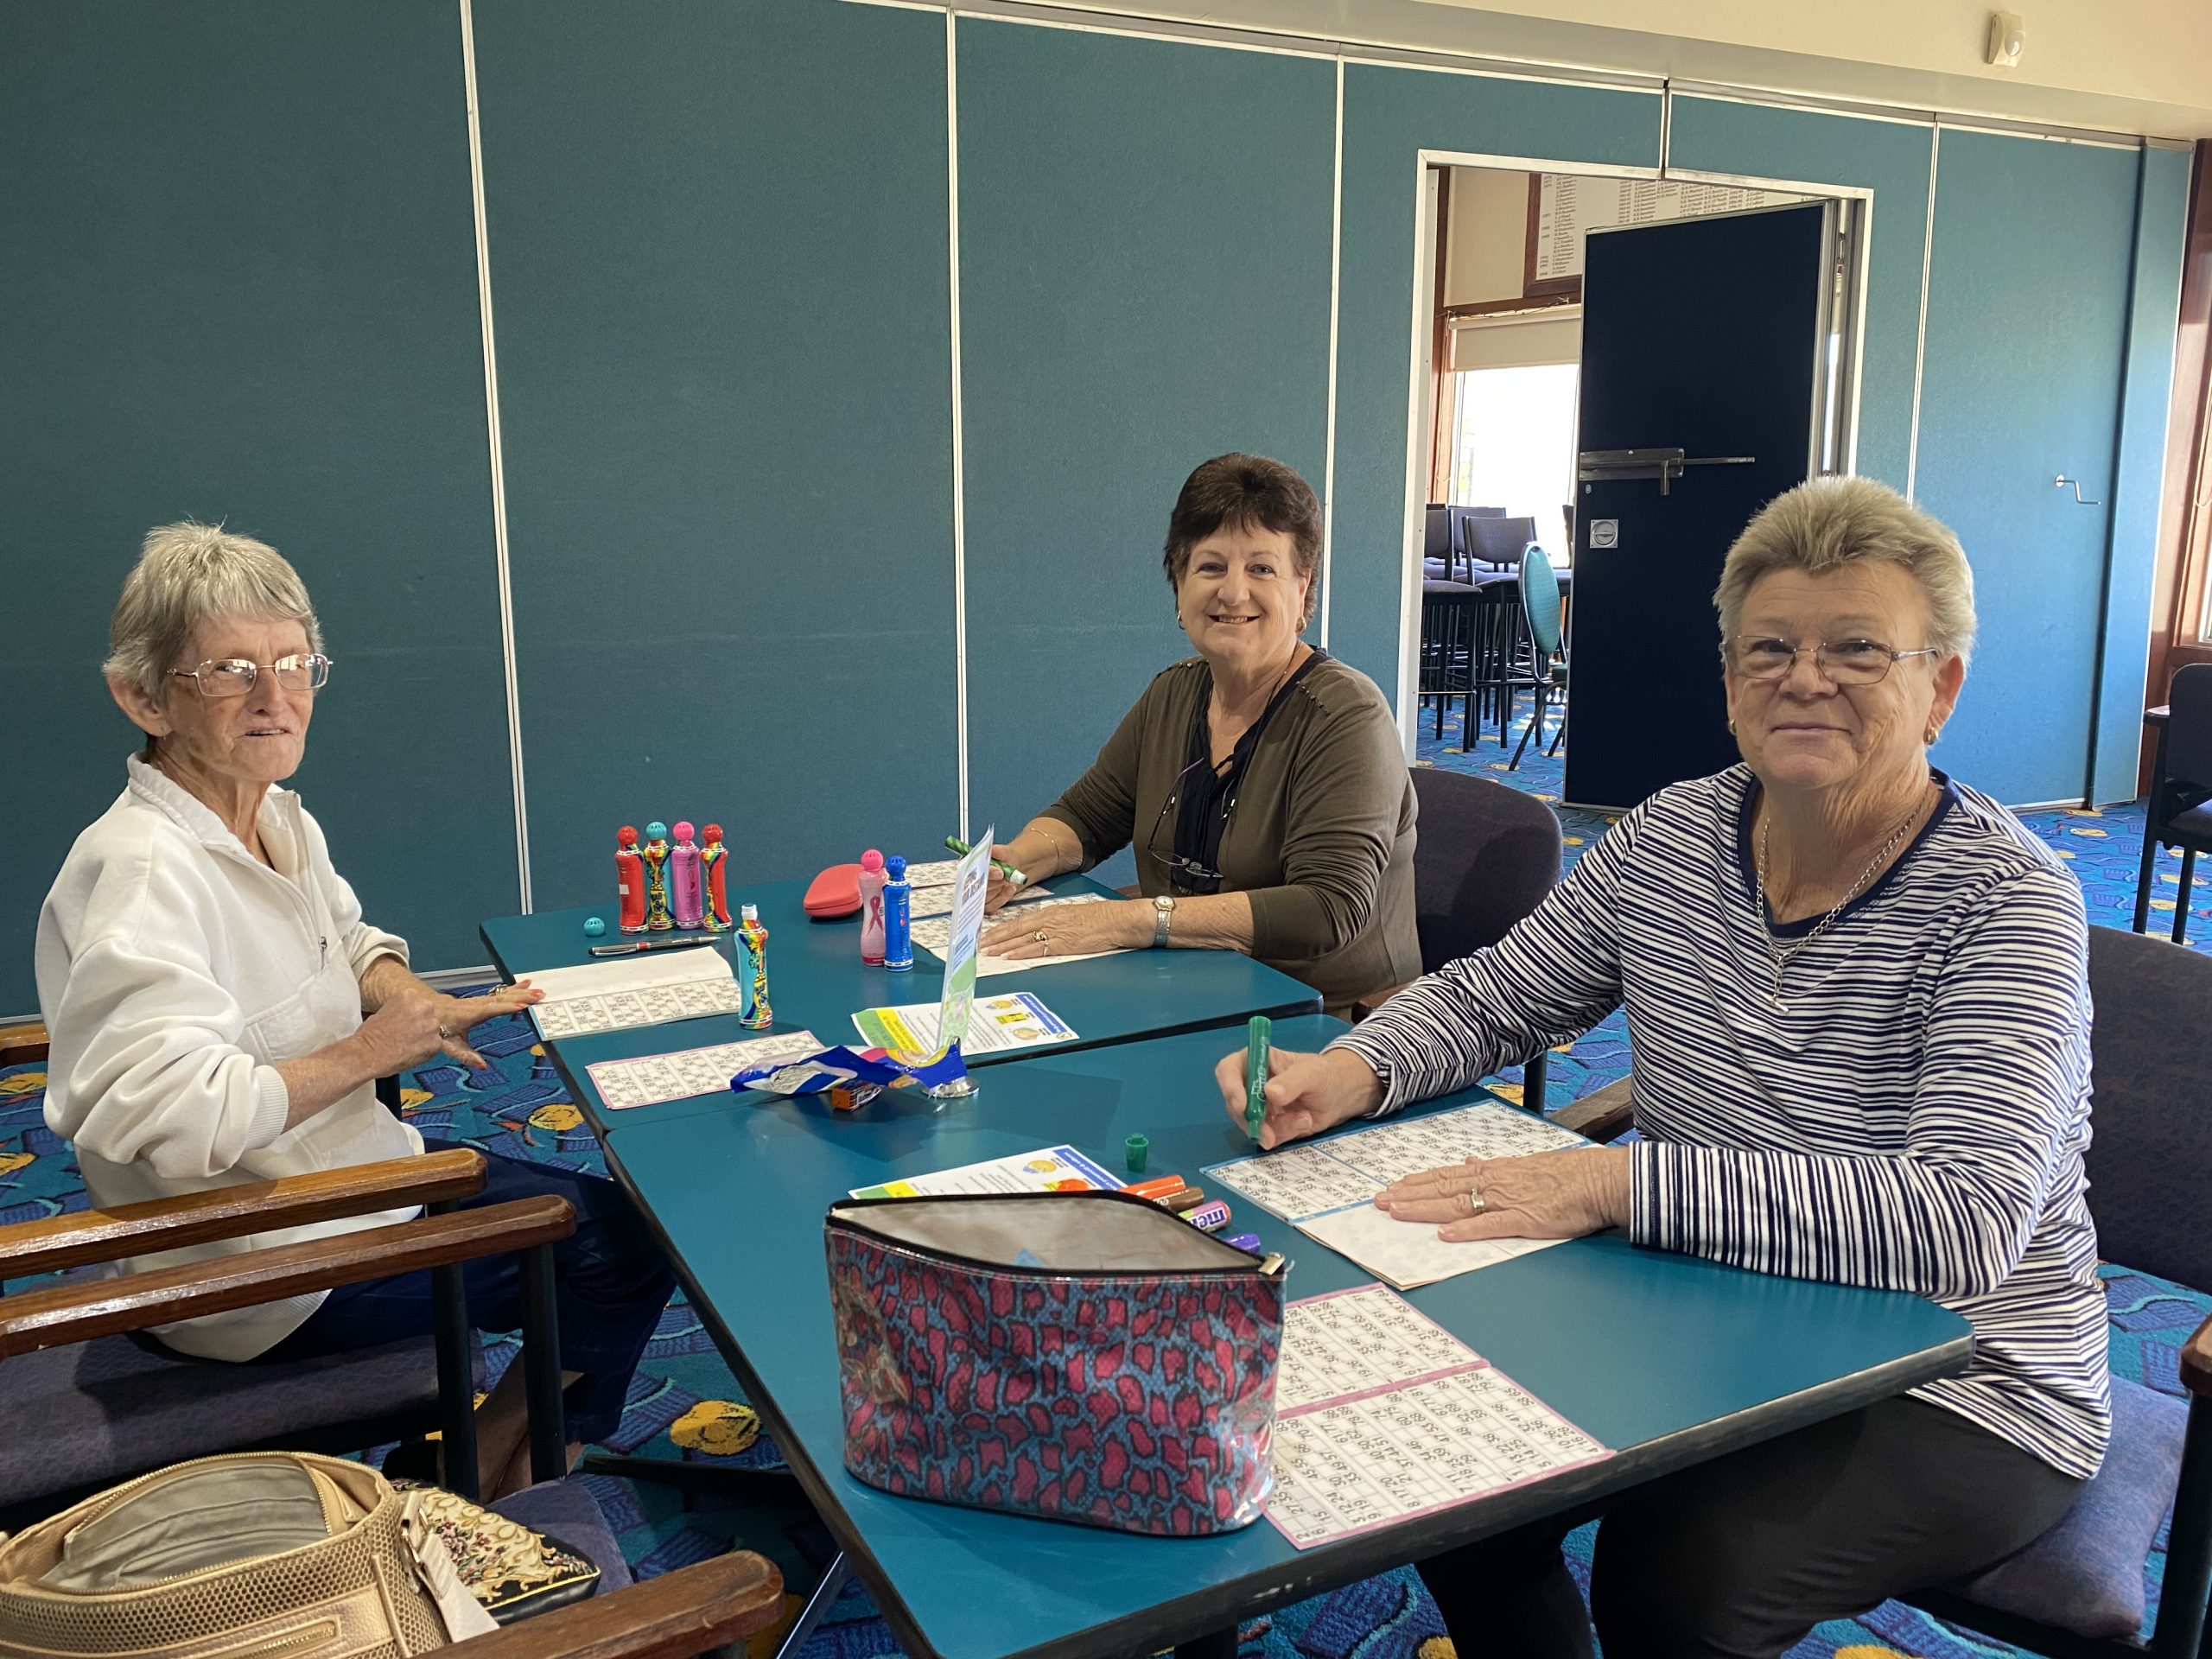 Sisters Rebecca, Lorraine and Jeanette Croaker were pleased to be back at the club, it closed in March due to COVID-19 restrictions.